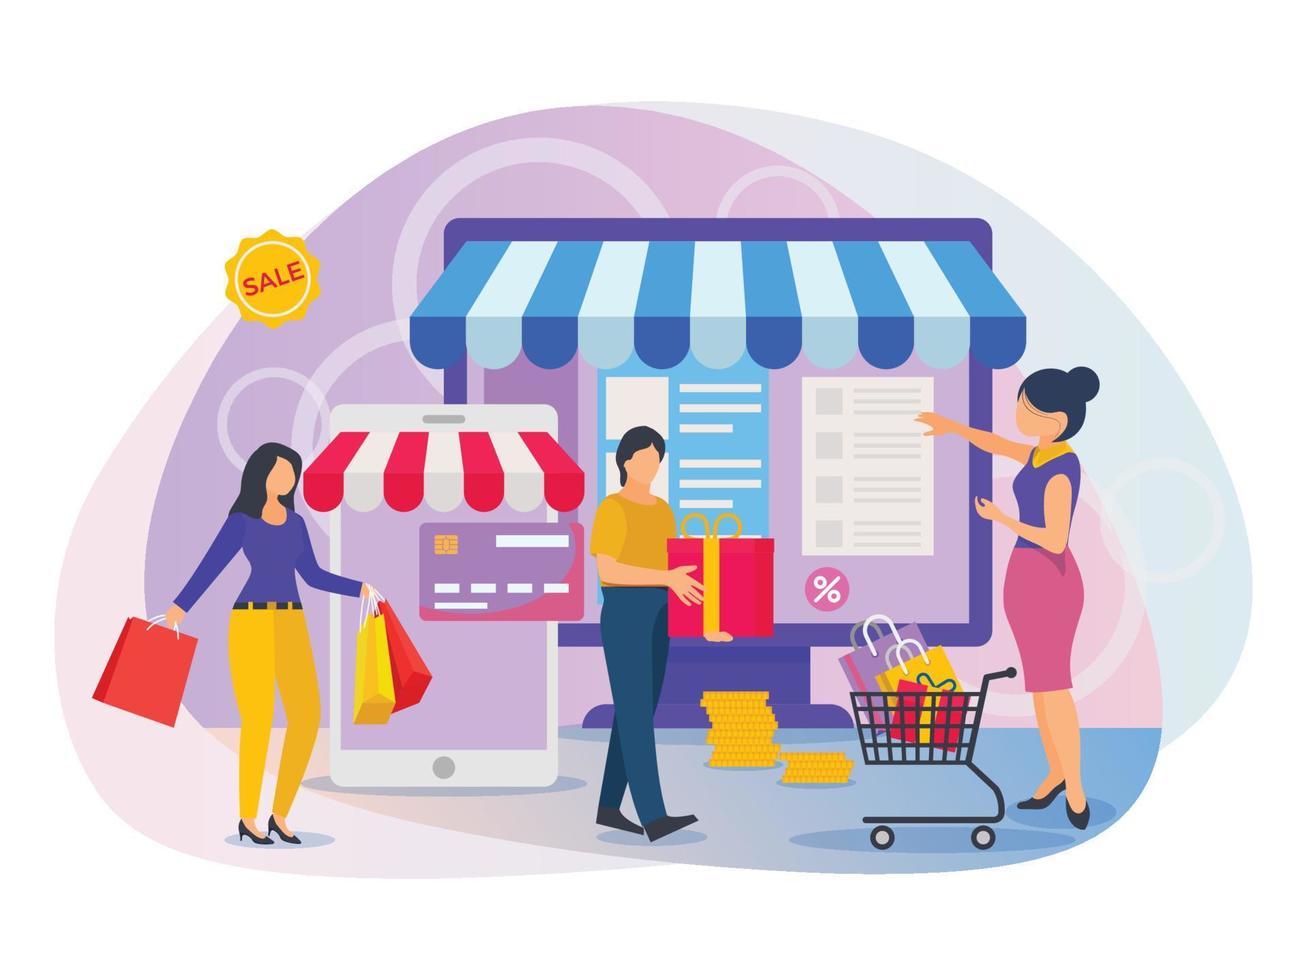 Peoples selecting items and making payment on online shopping website illustration. vector